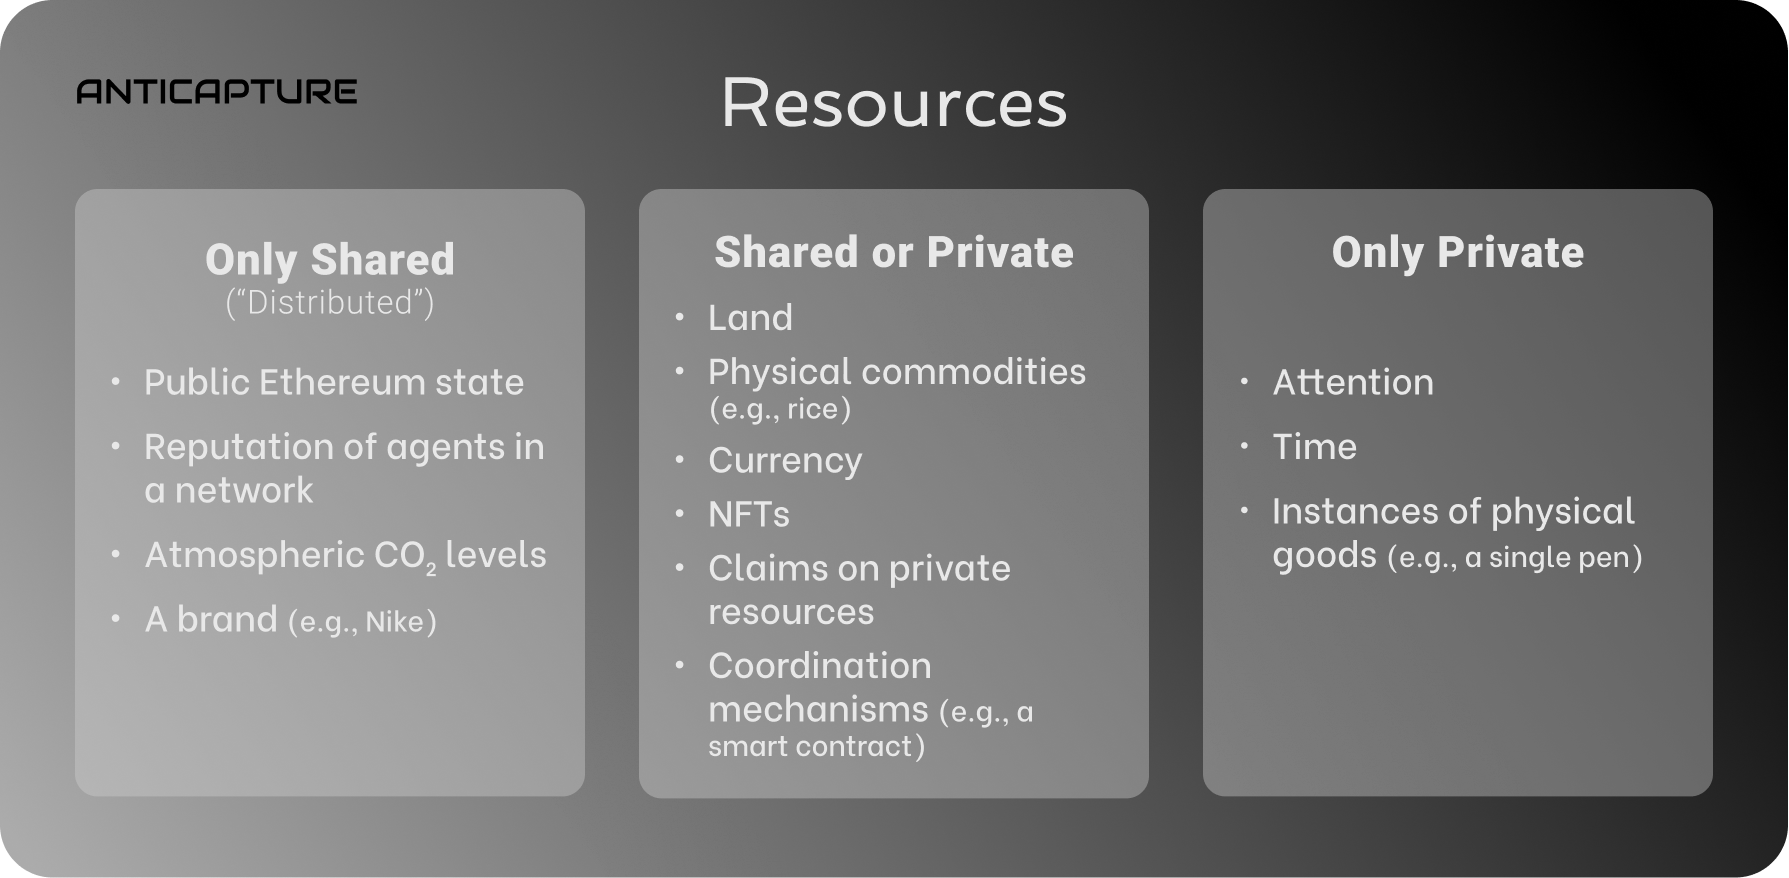 Several examples of resources, by categories in the Anticapture framework.